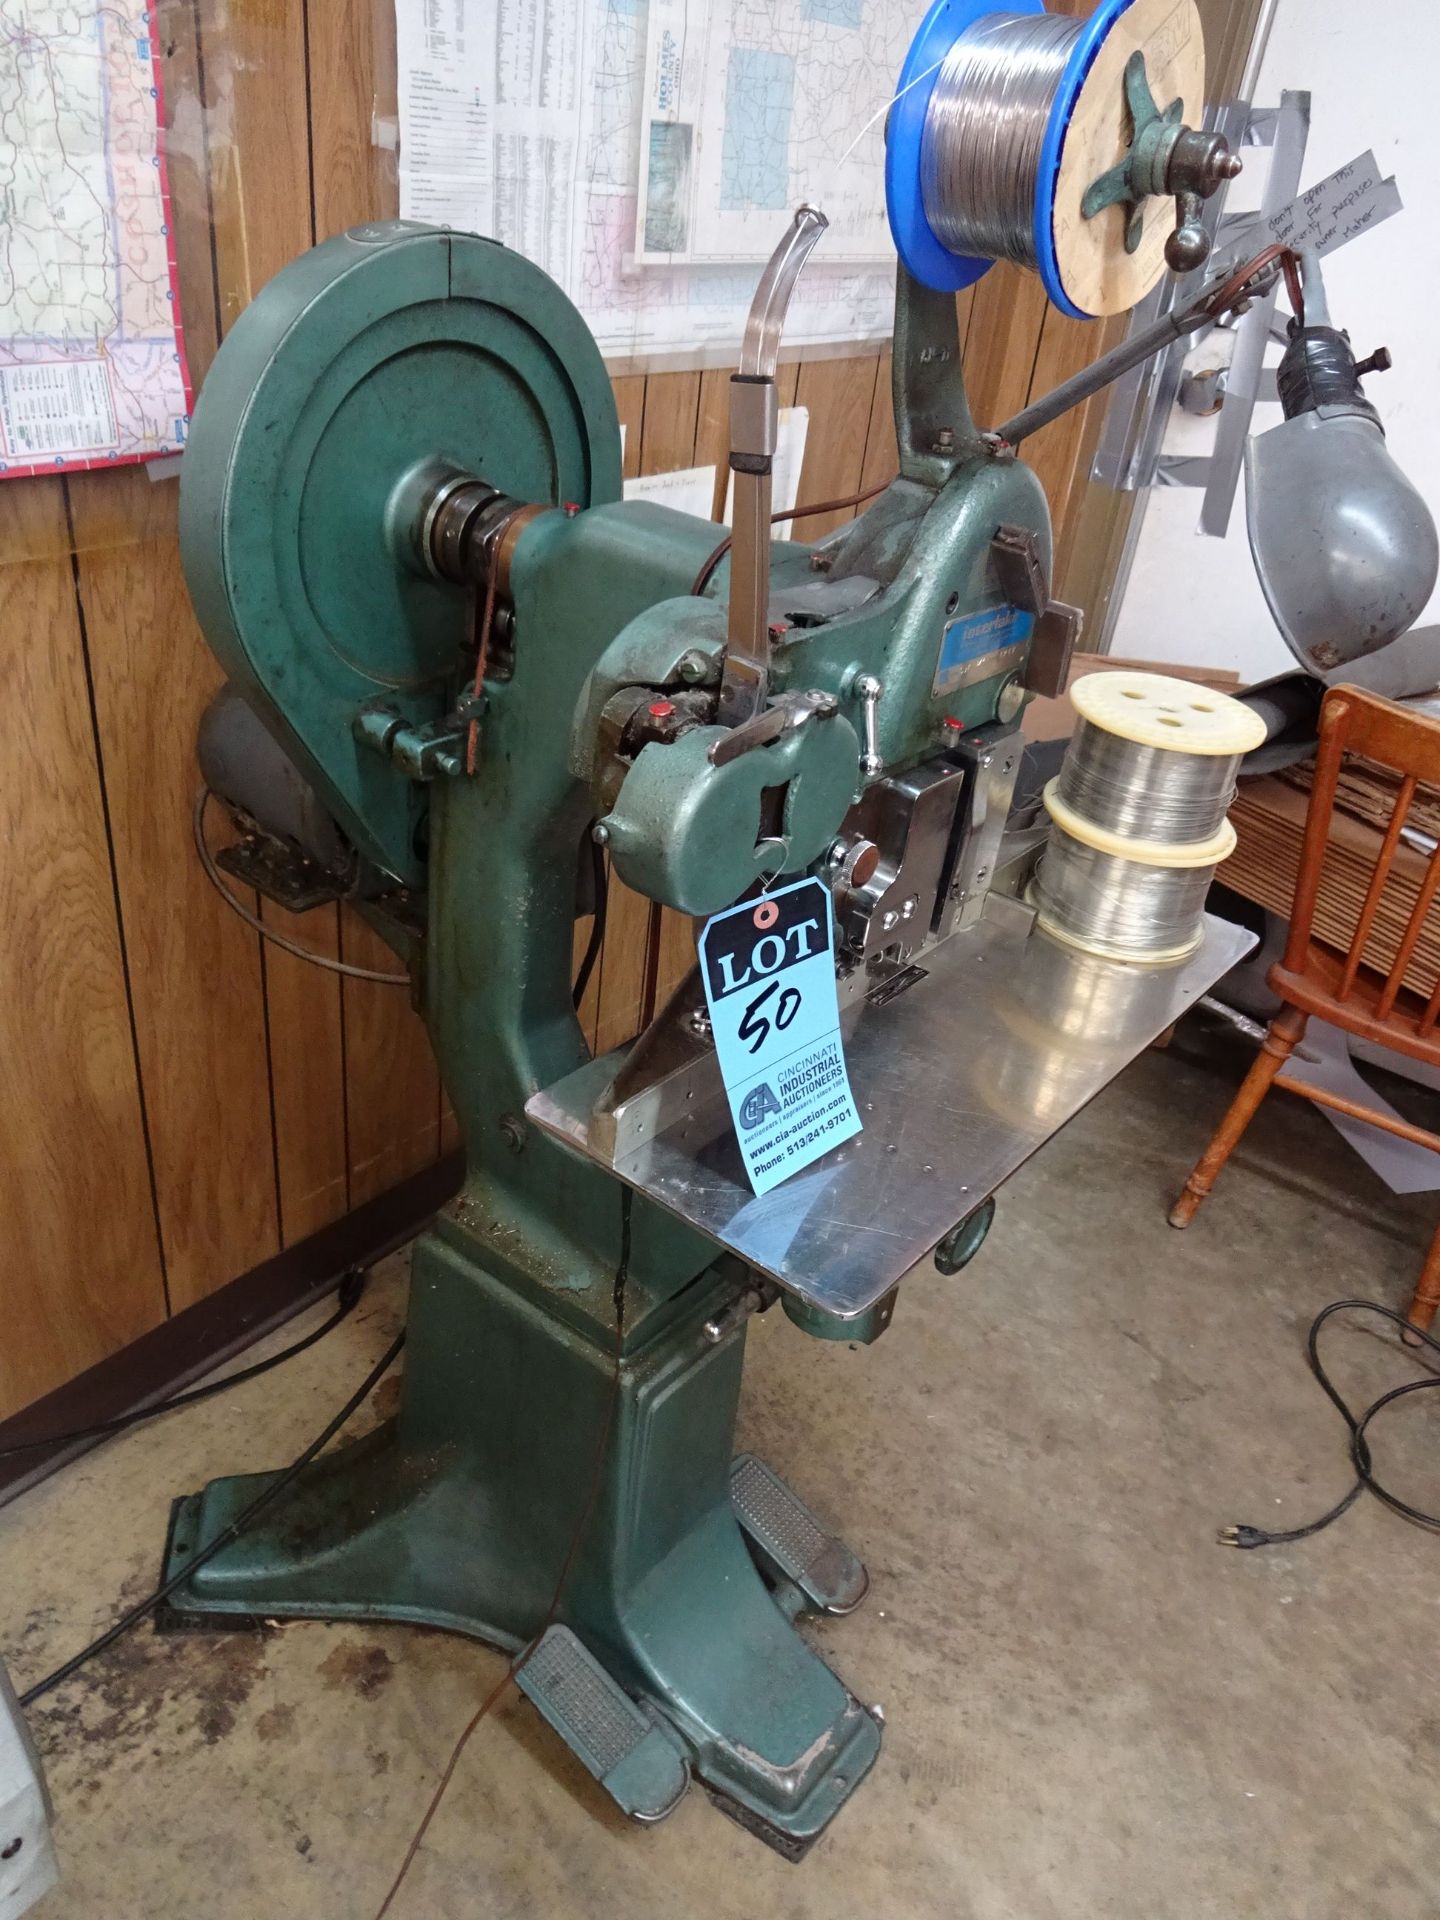 INTERLAKE MODEL S3A 3/4 SINGLE HEAD STITCHER; S/N 1217 - $75.00 LOADING COST DUE DIRECTLY TO BOGNER - Image 4 of 4